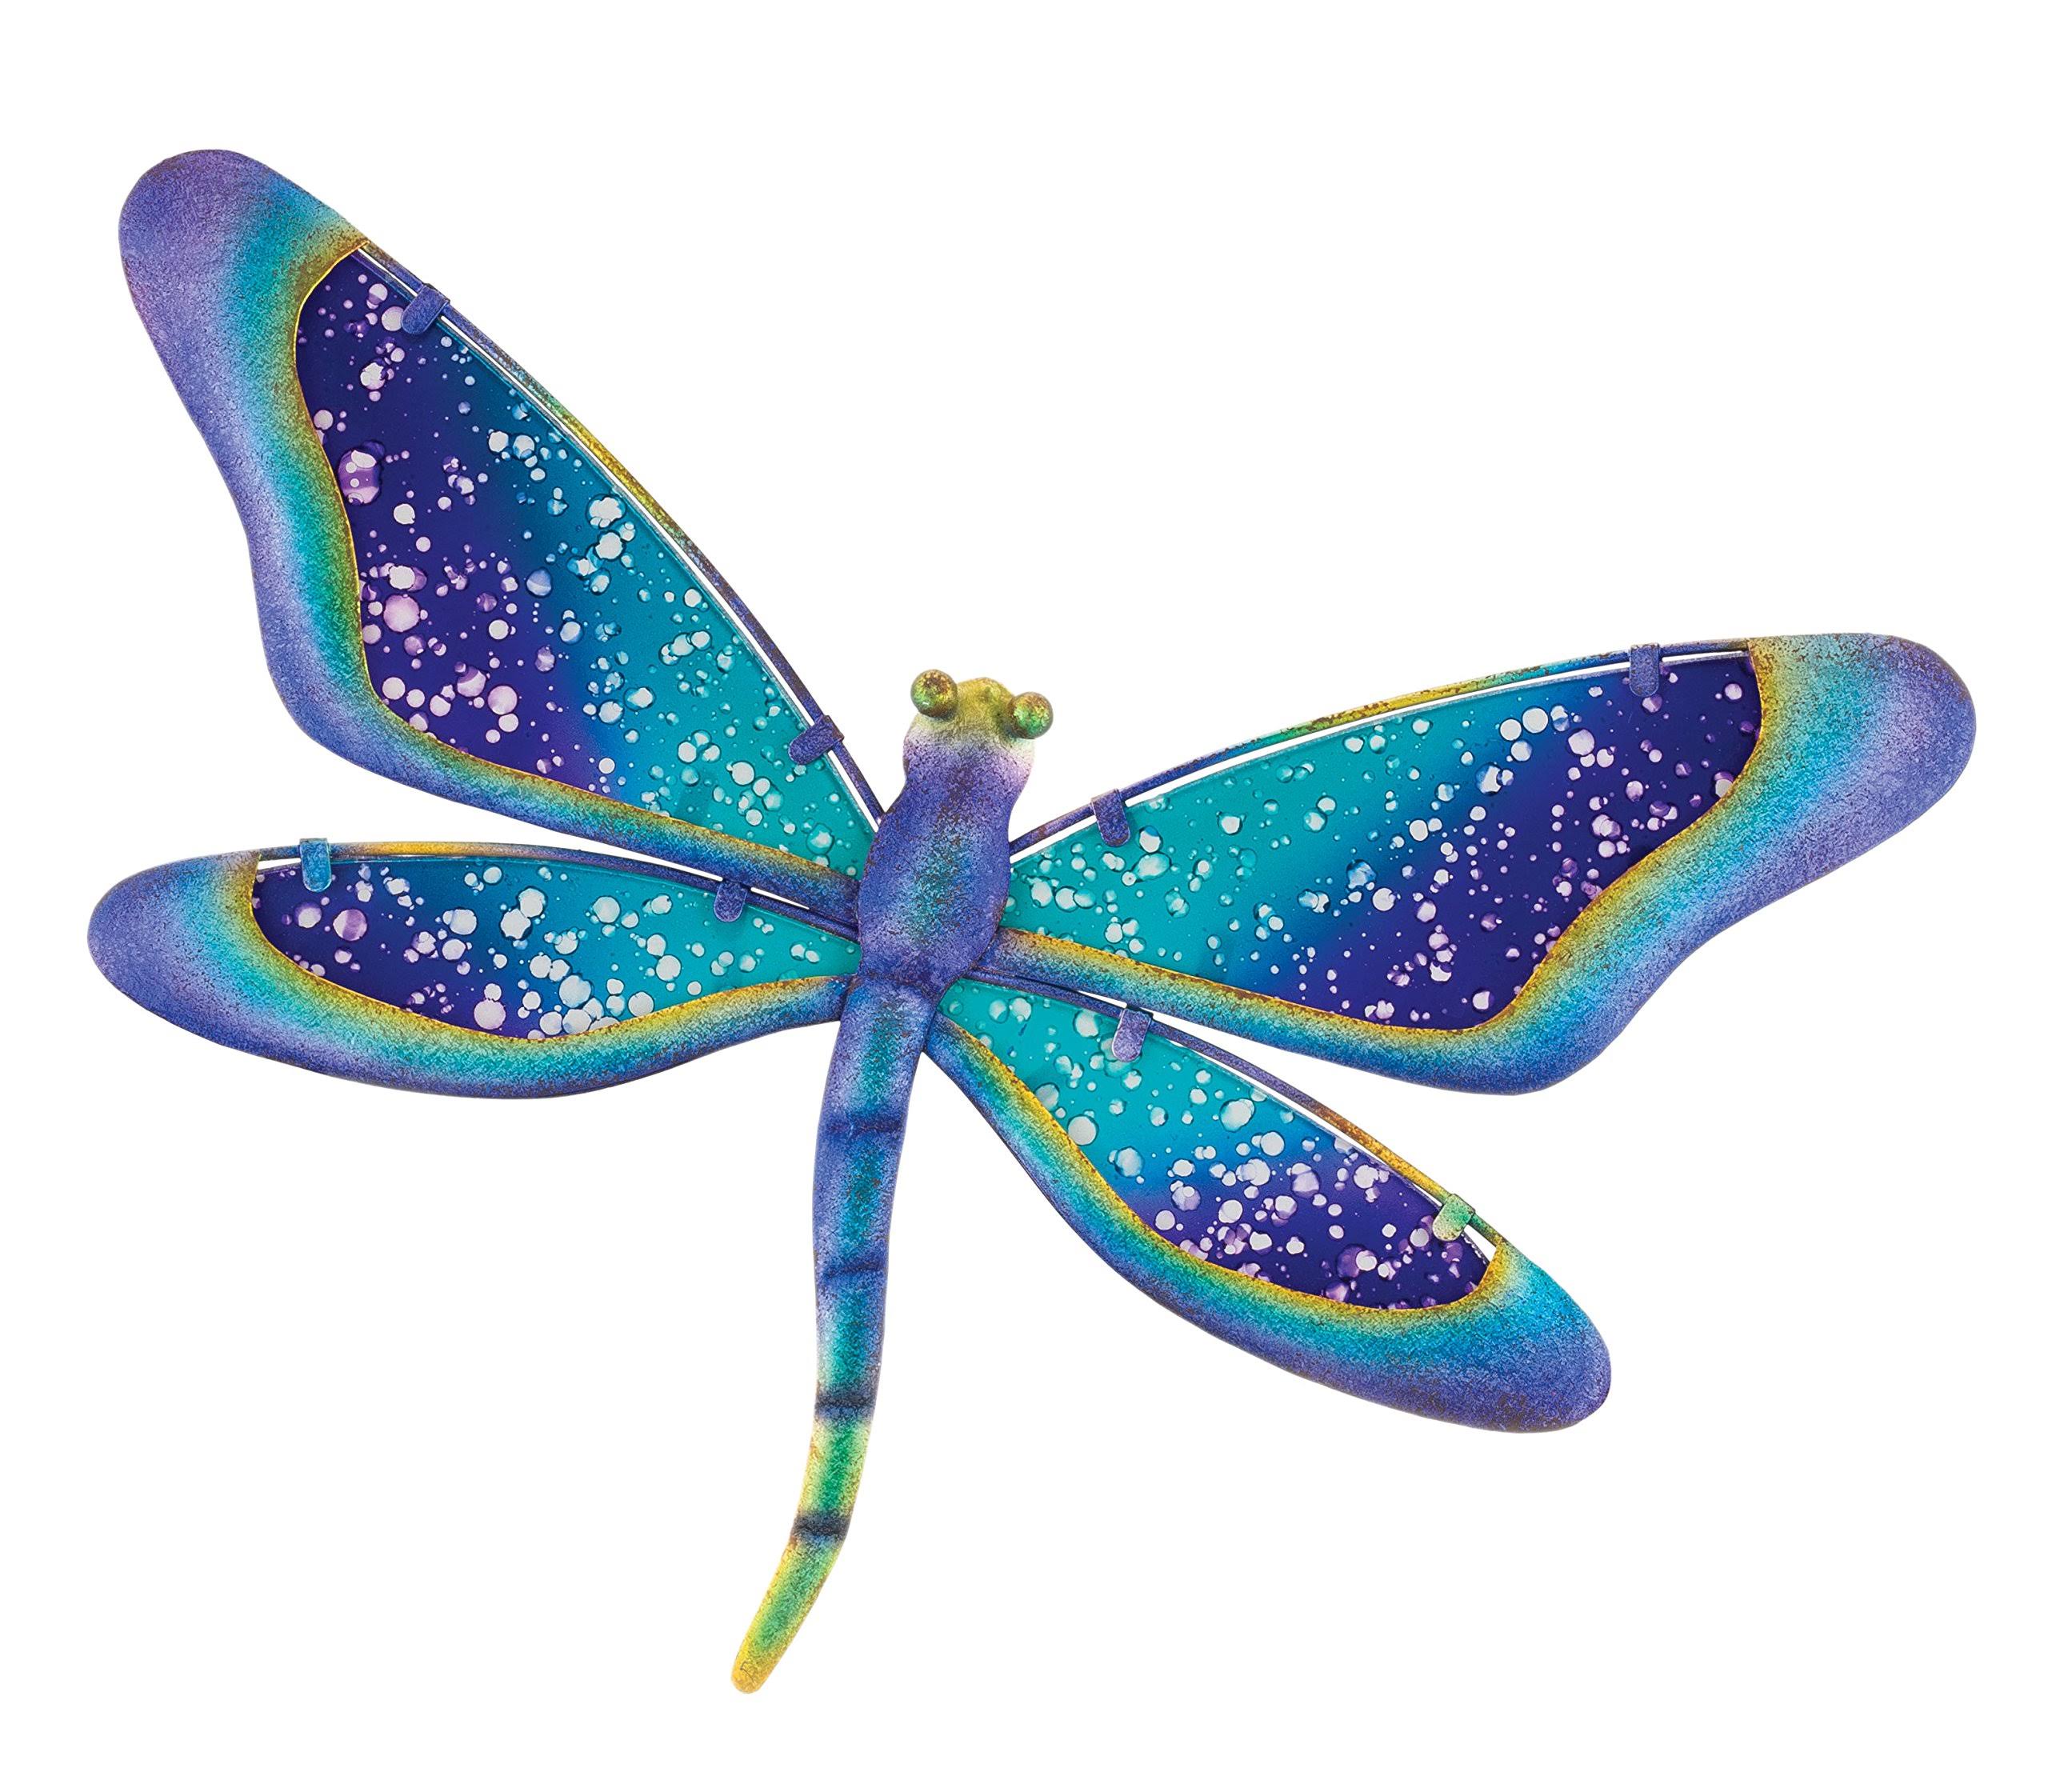 Regal Art & Gift Dragonfly Watercolor Wall Decor 11"